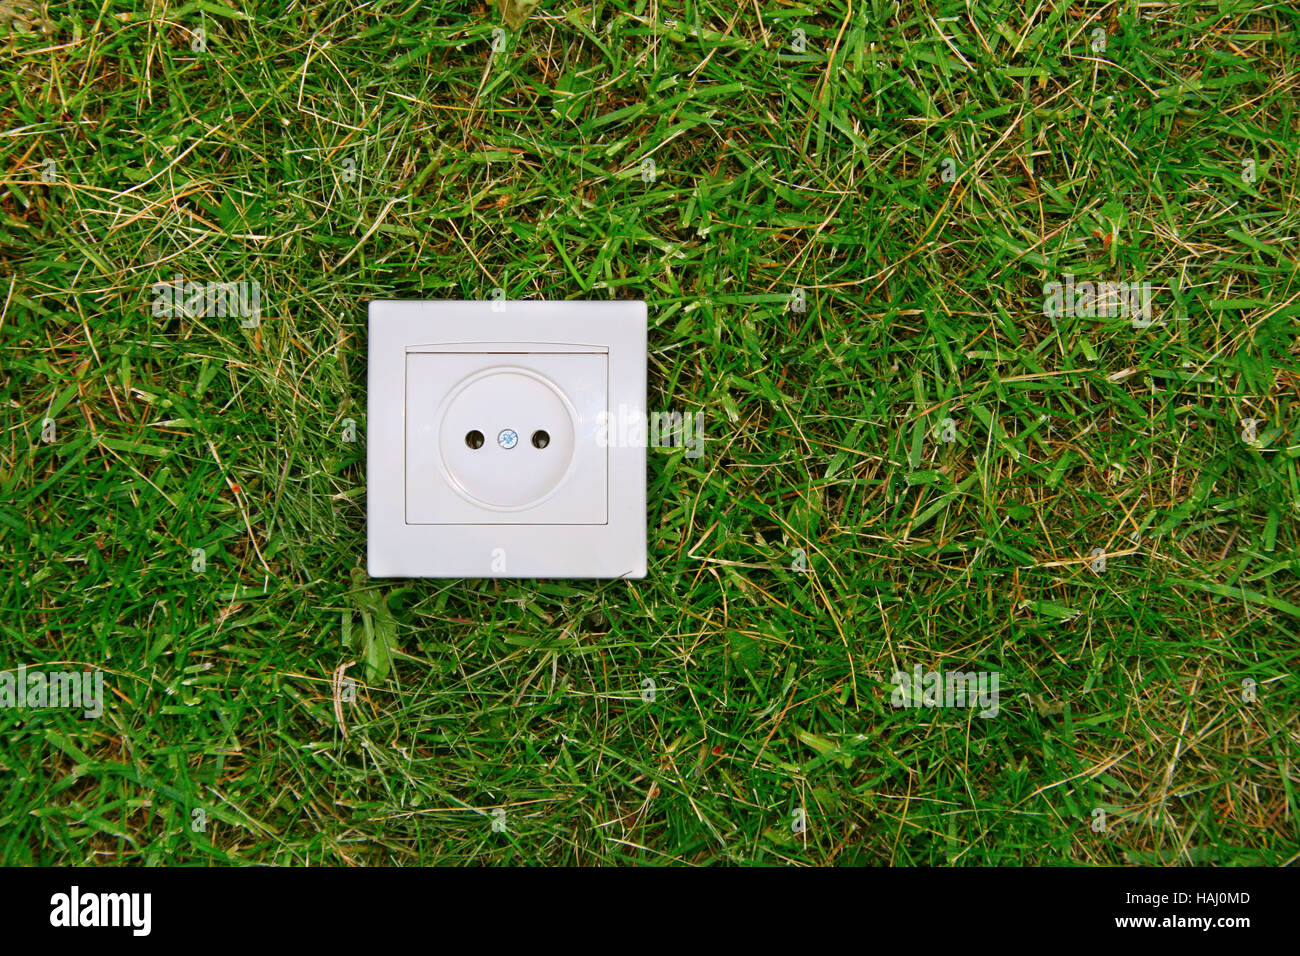 green energy concept: electric outlet on a grass Stock Photo